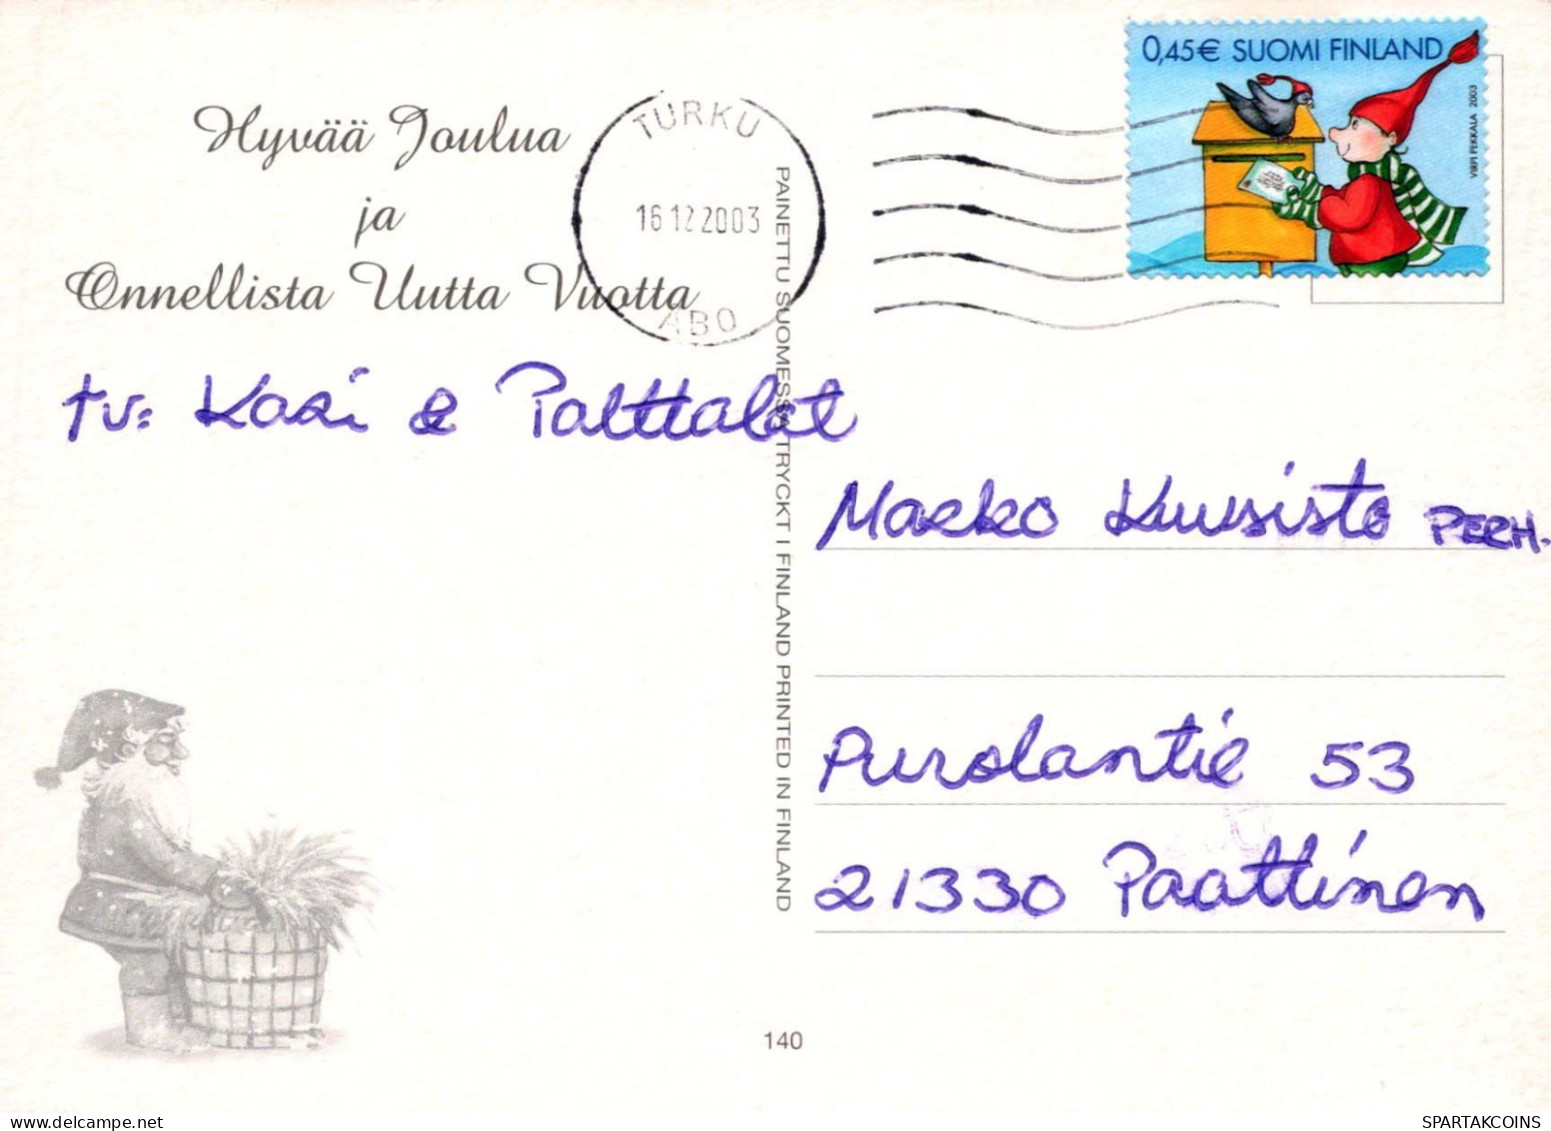 BABBO NATALE Buon Anno Natale Vintage Cartolina CPSM #PBL188.IT - Kerstman